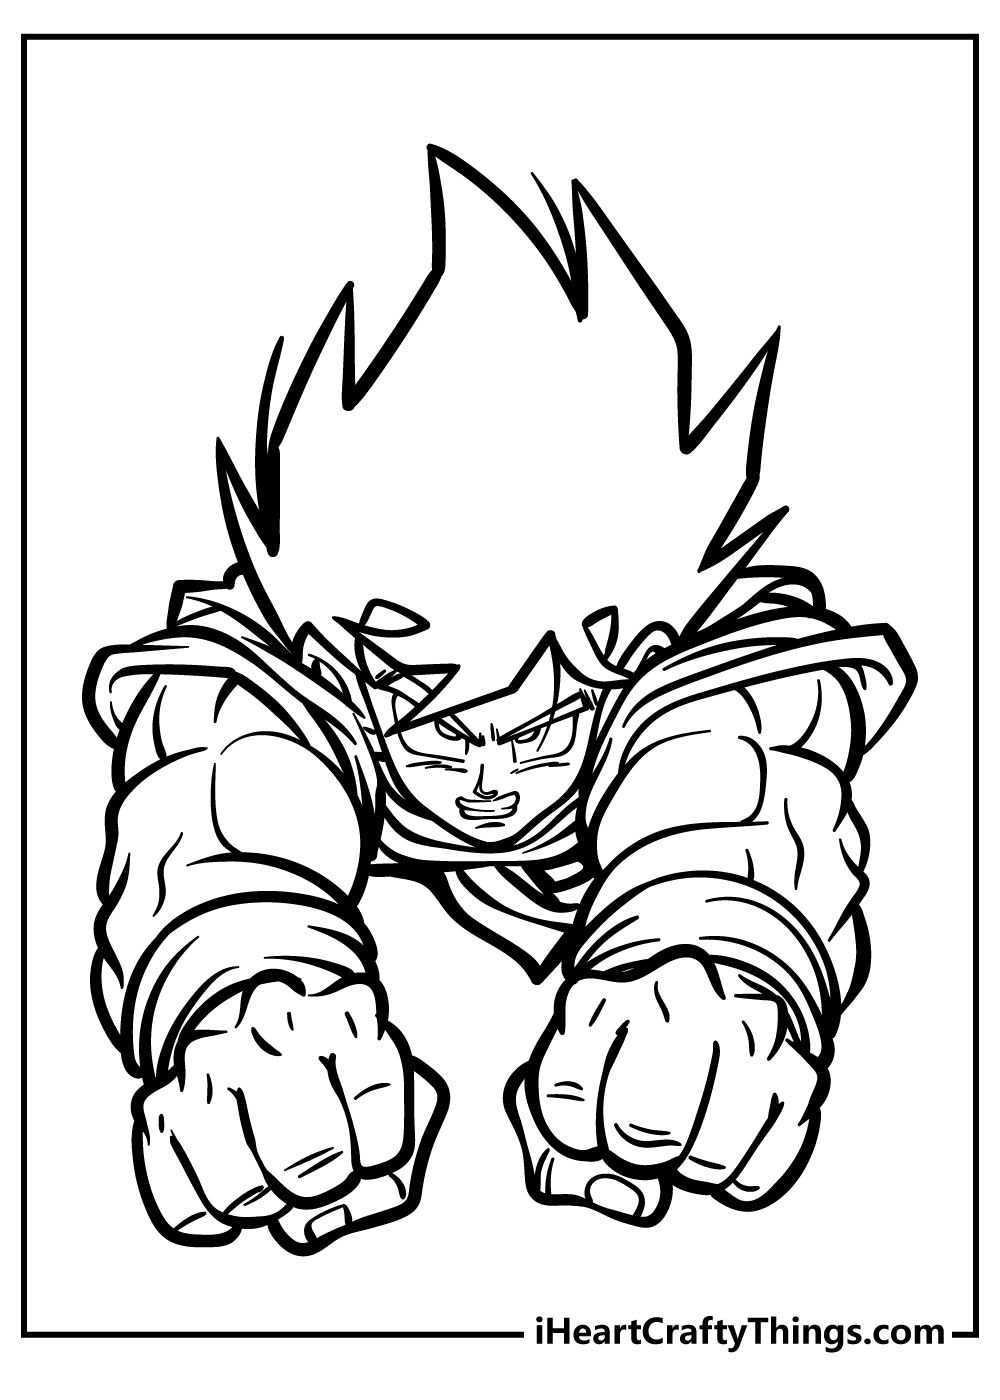 Dragon Ball Z Coloring Book for adults free download